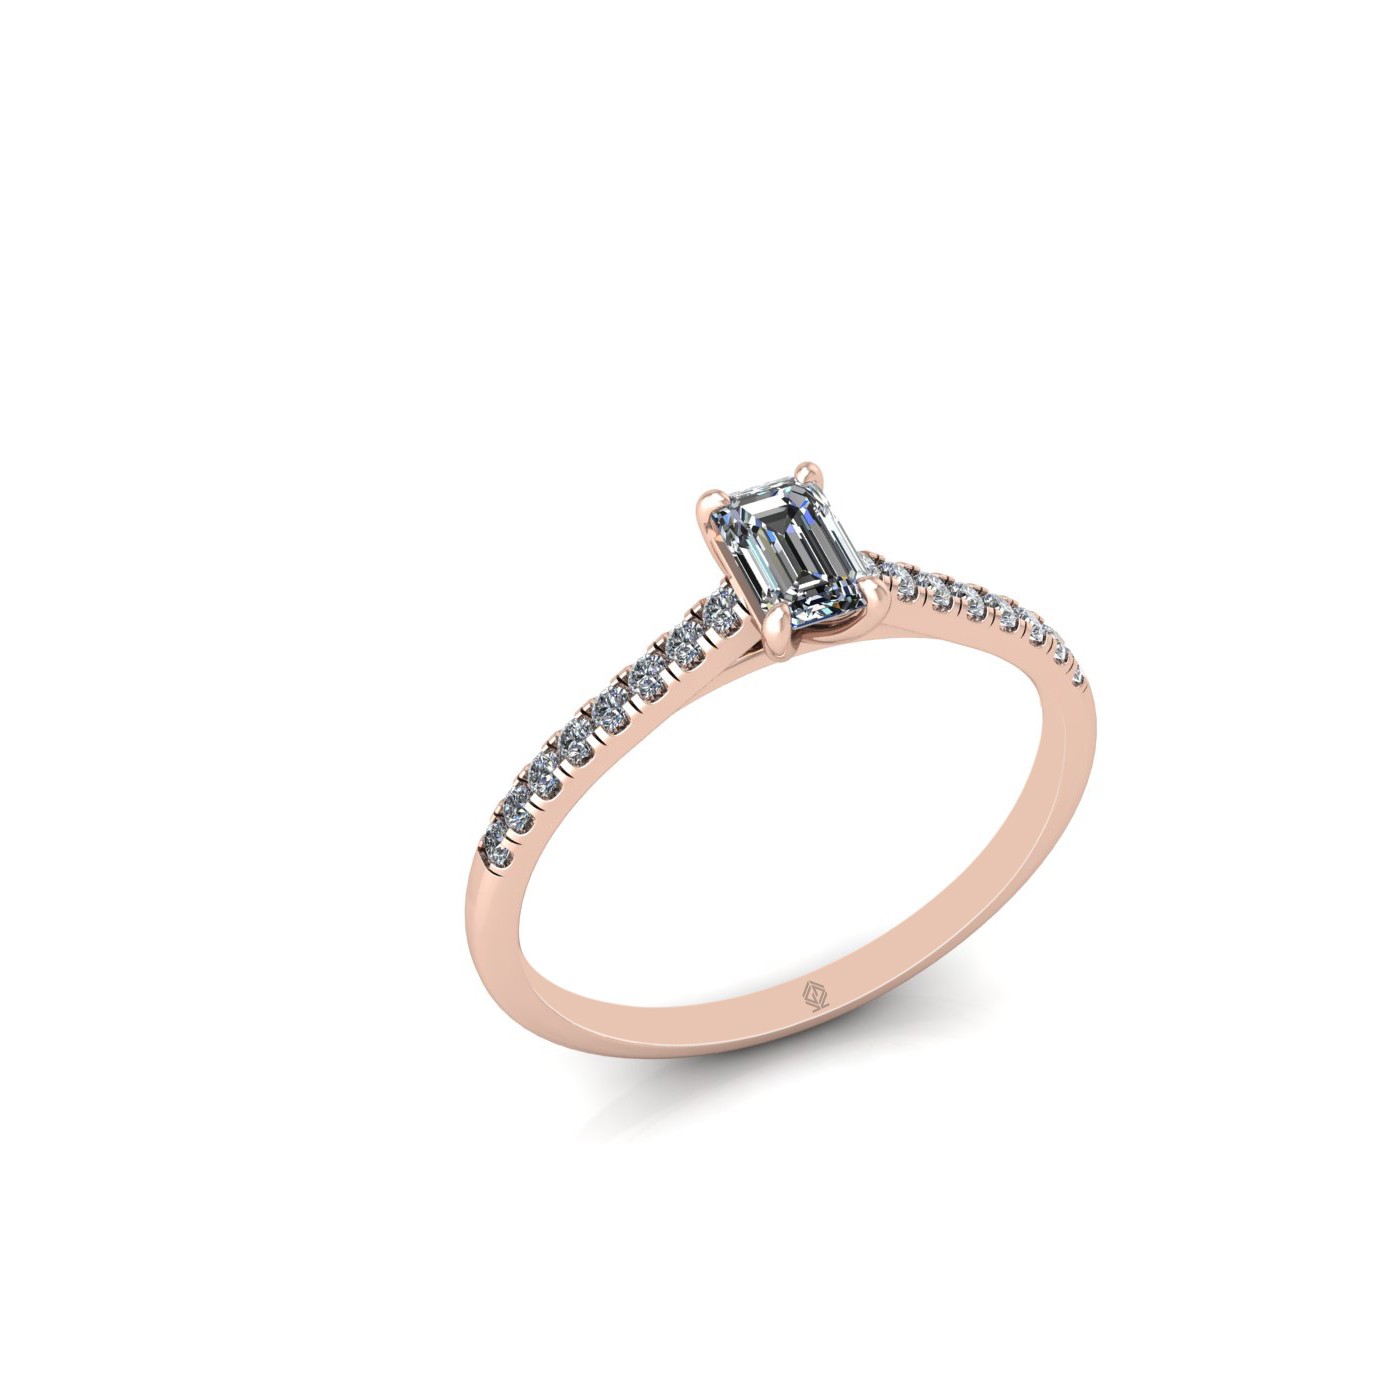 18k rose gold  0,30 ct 4 prongs emerald cut diamond engagement ring with whisper thin pavÉ set band